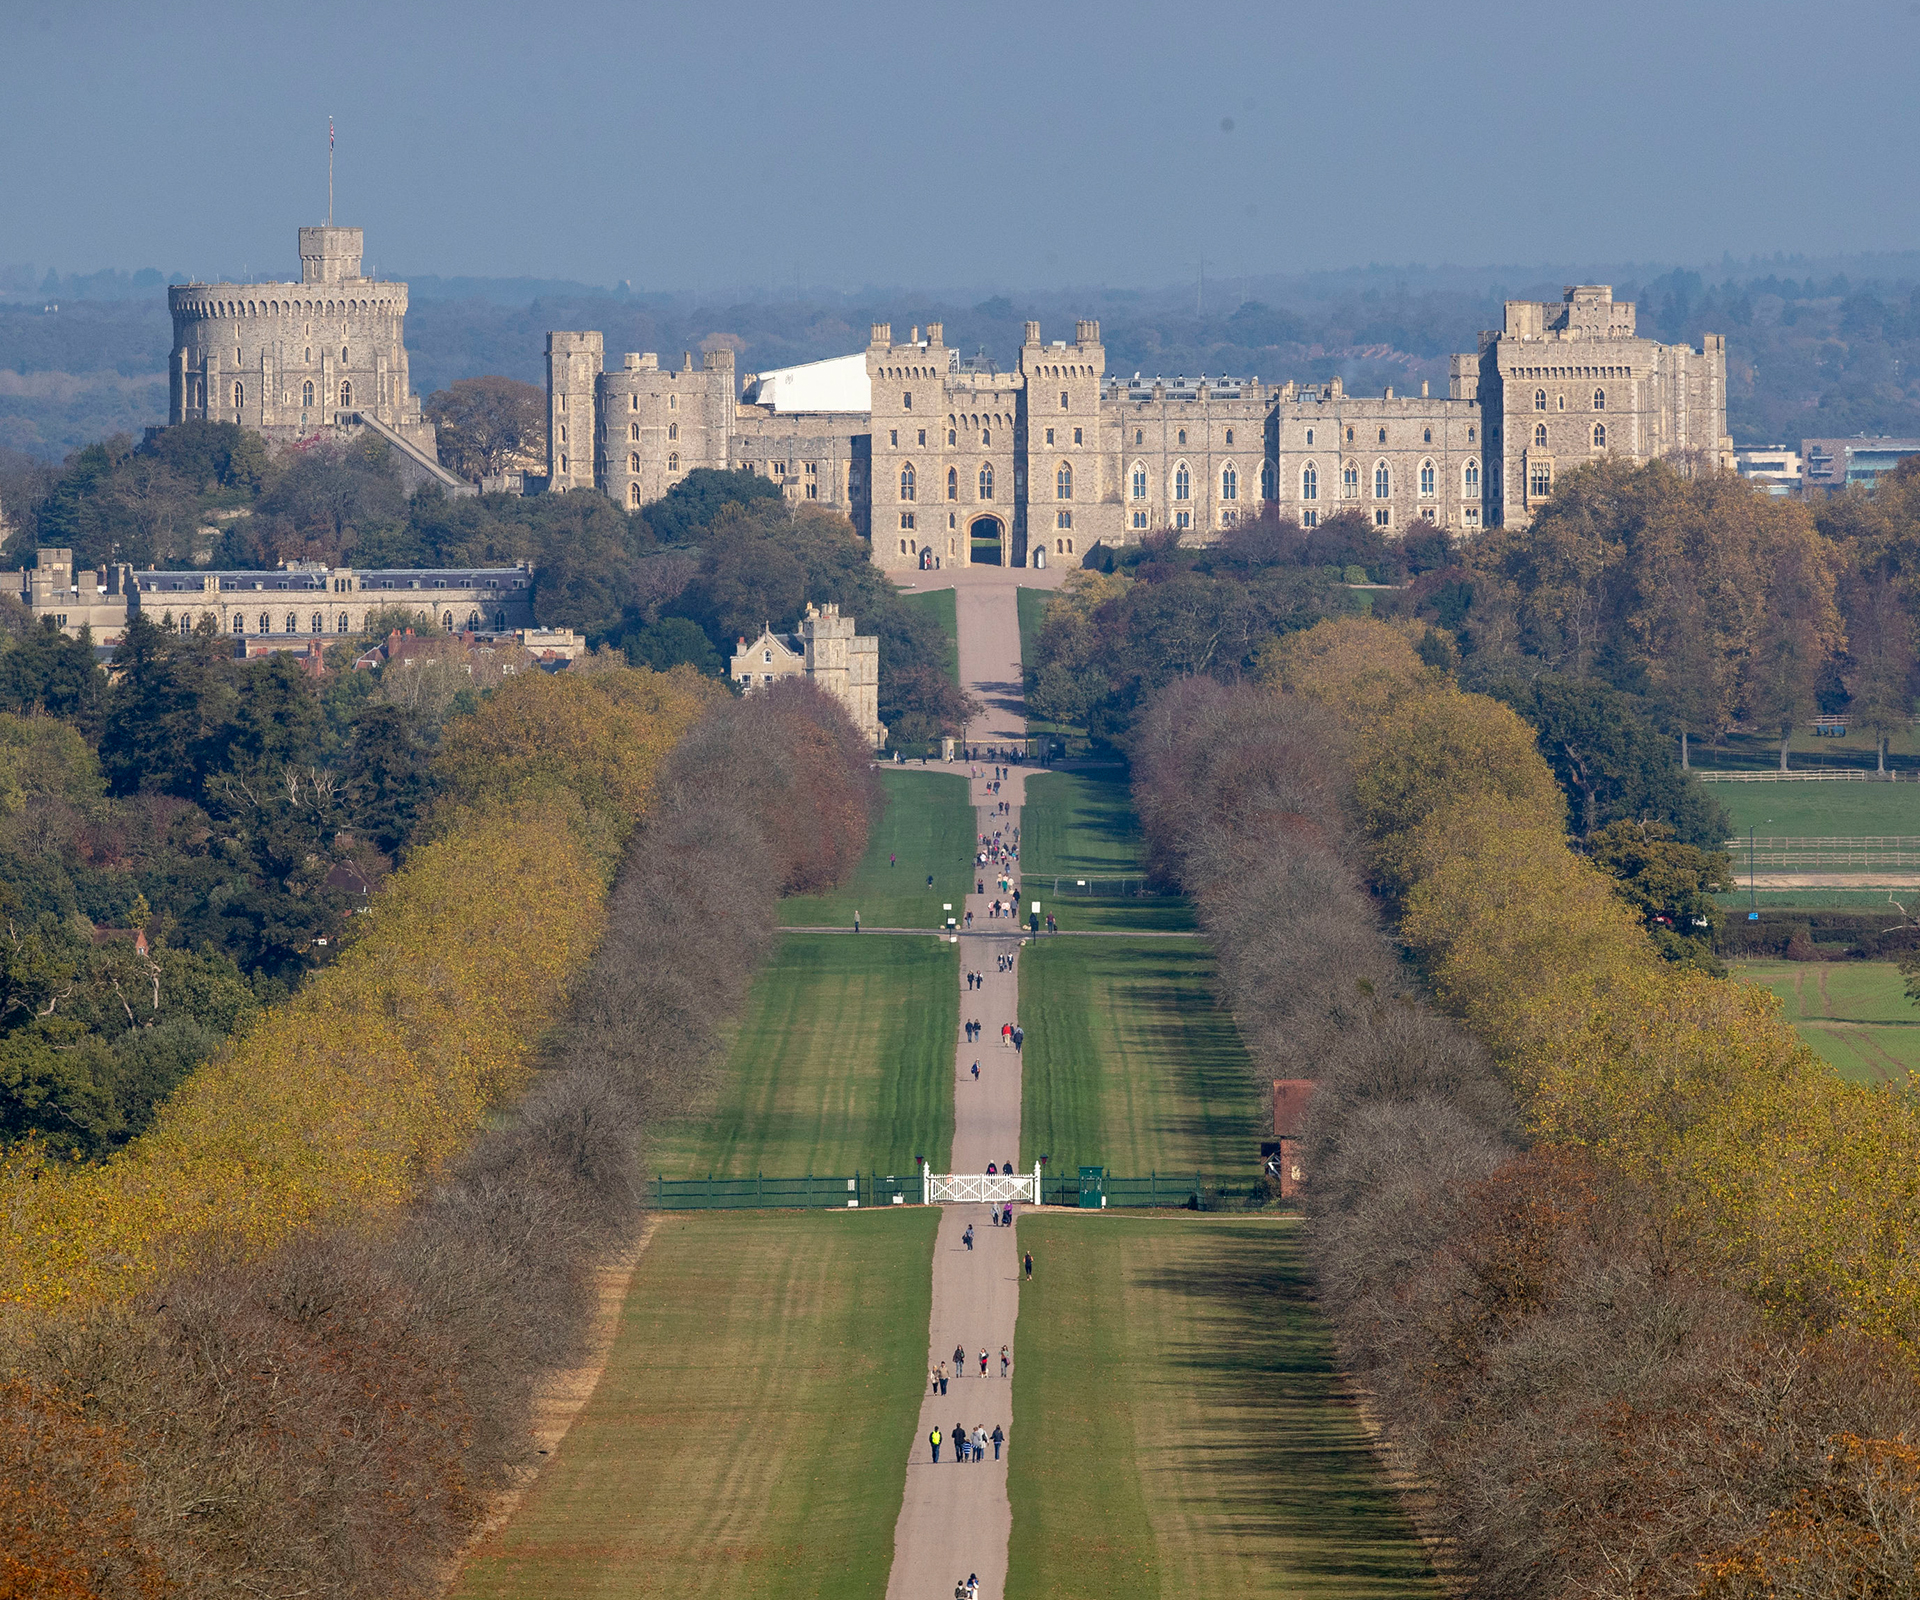 homes owned by the British royal family: Windsor Castle